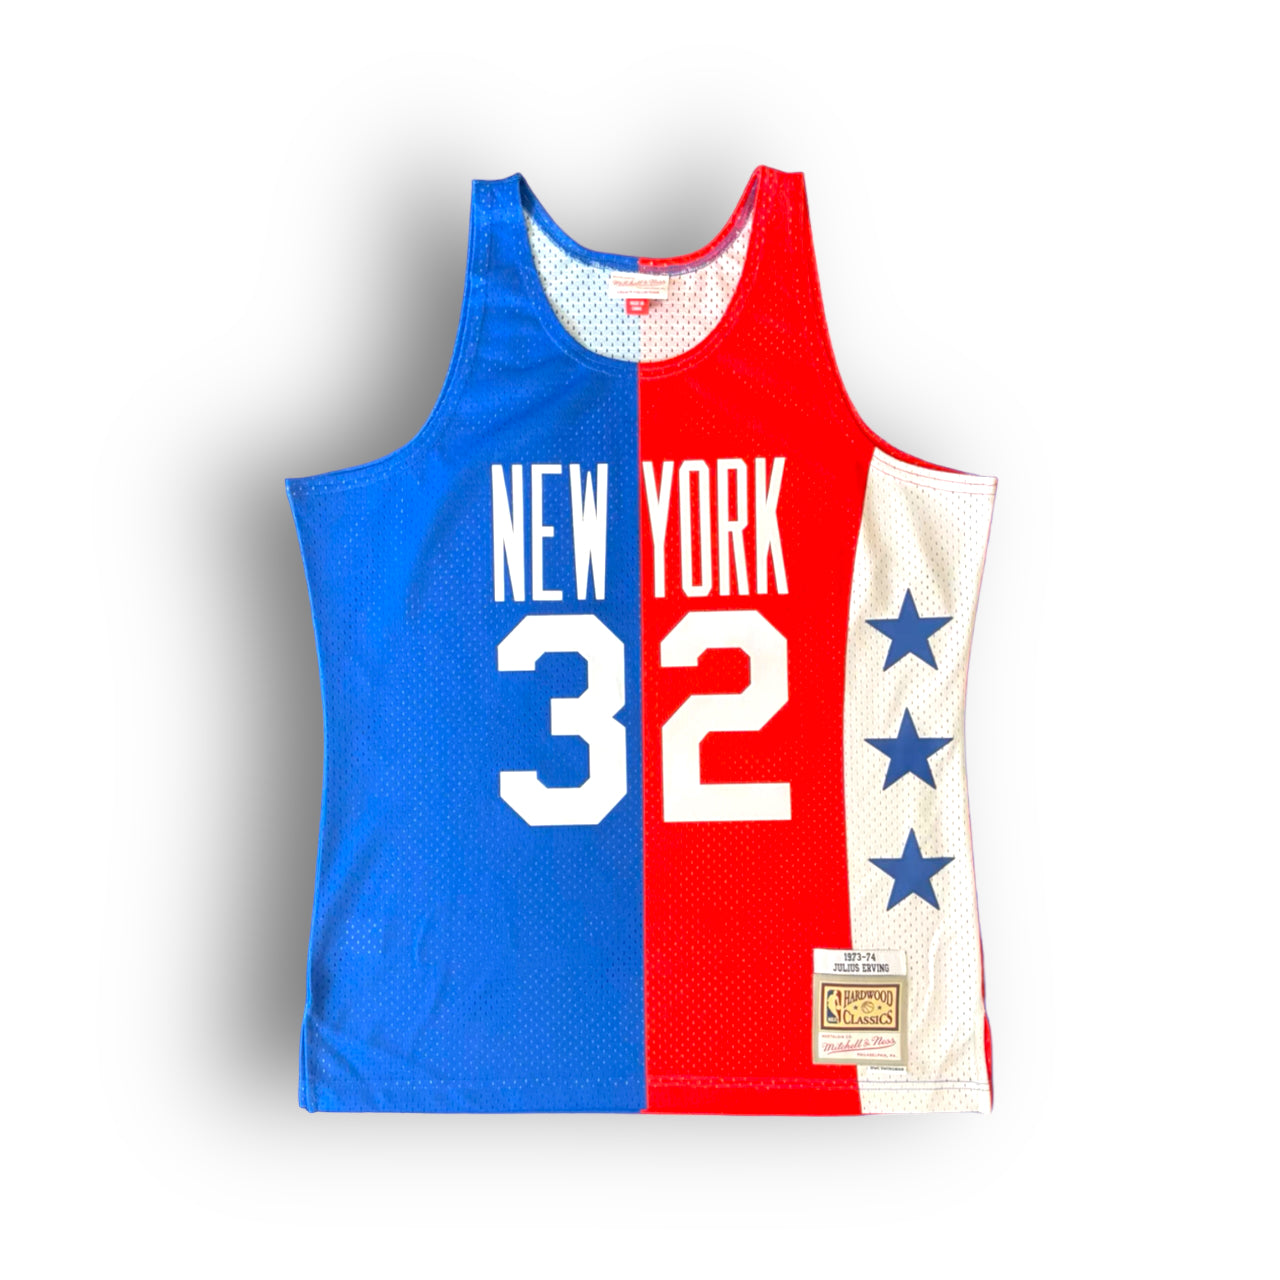 Julius Erving 1973-1974 New York Knicks Two Tone Edition Mitchell & Ness Swingman Jersey - Red/Blue - Hoop Jersey Store